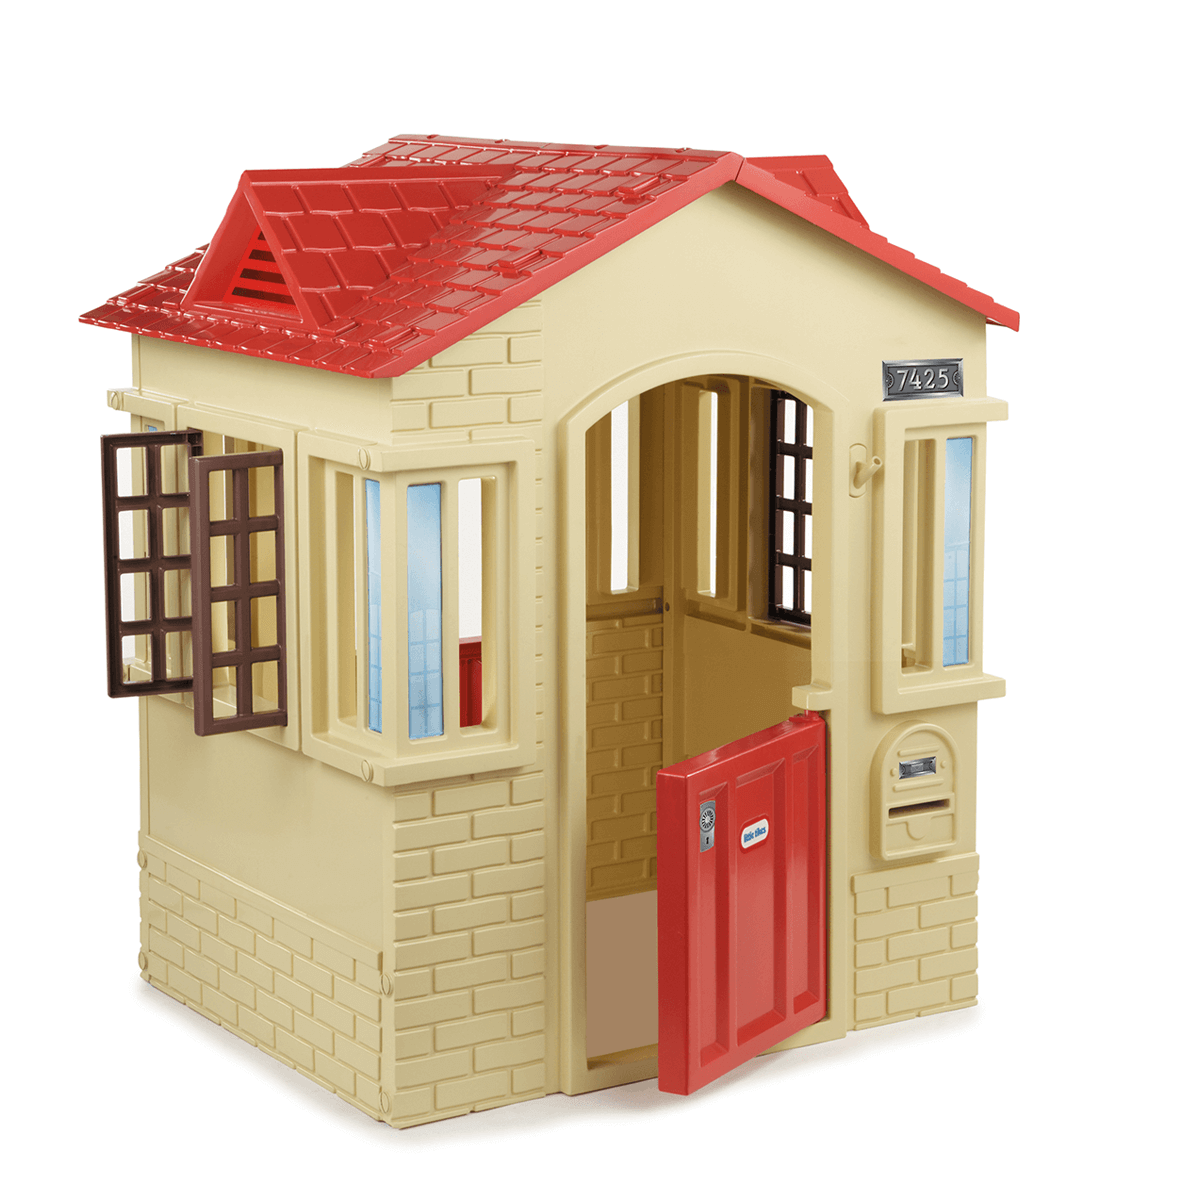  Little Tikes Cape Cottage - Tan/Red Playhouse